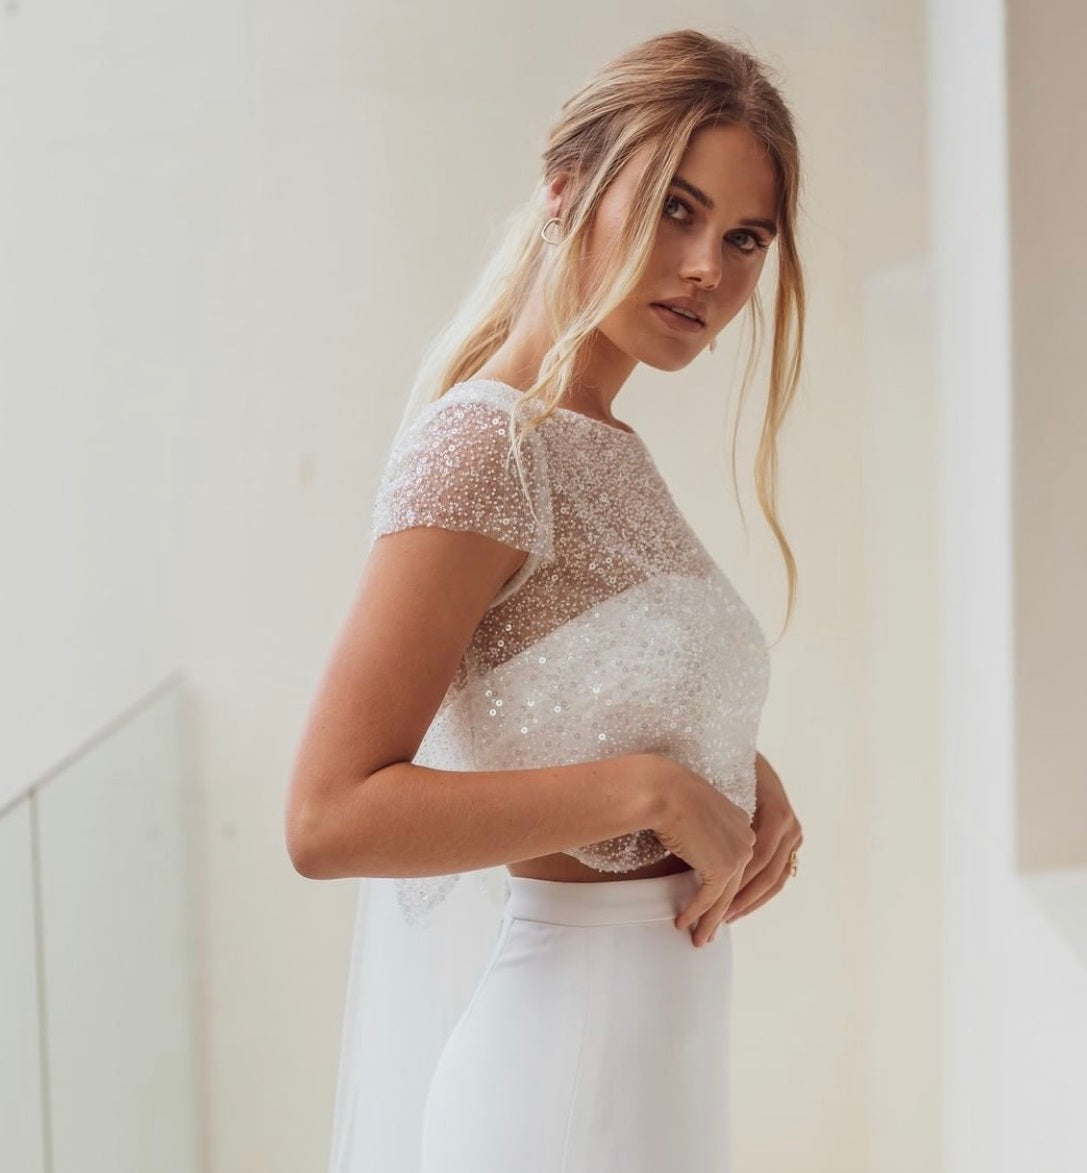 Wedding Lace: Learn About the Different Types